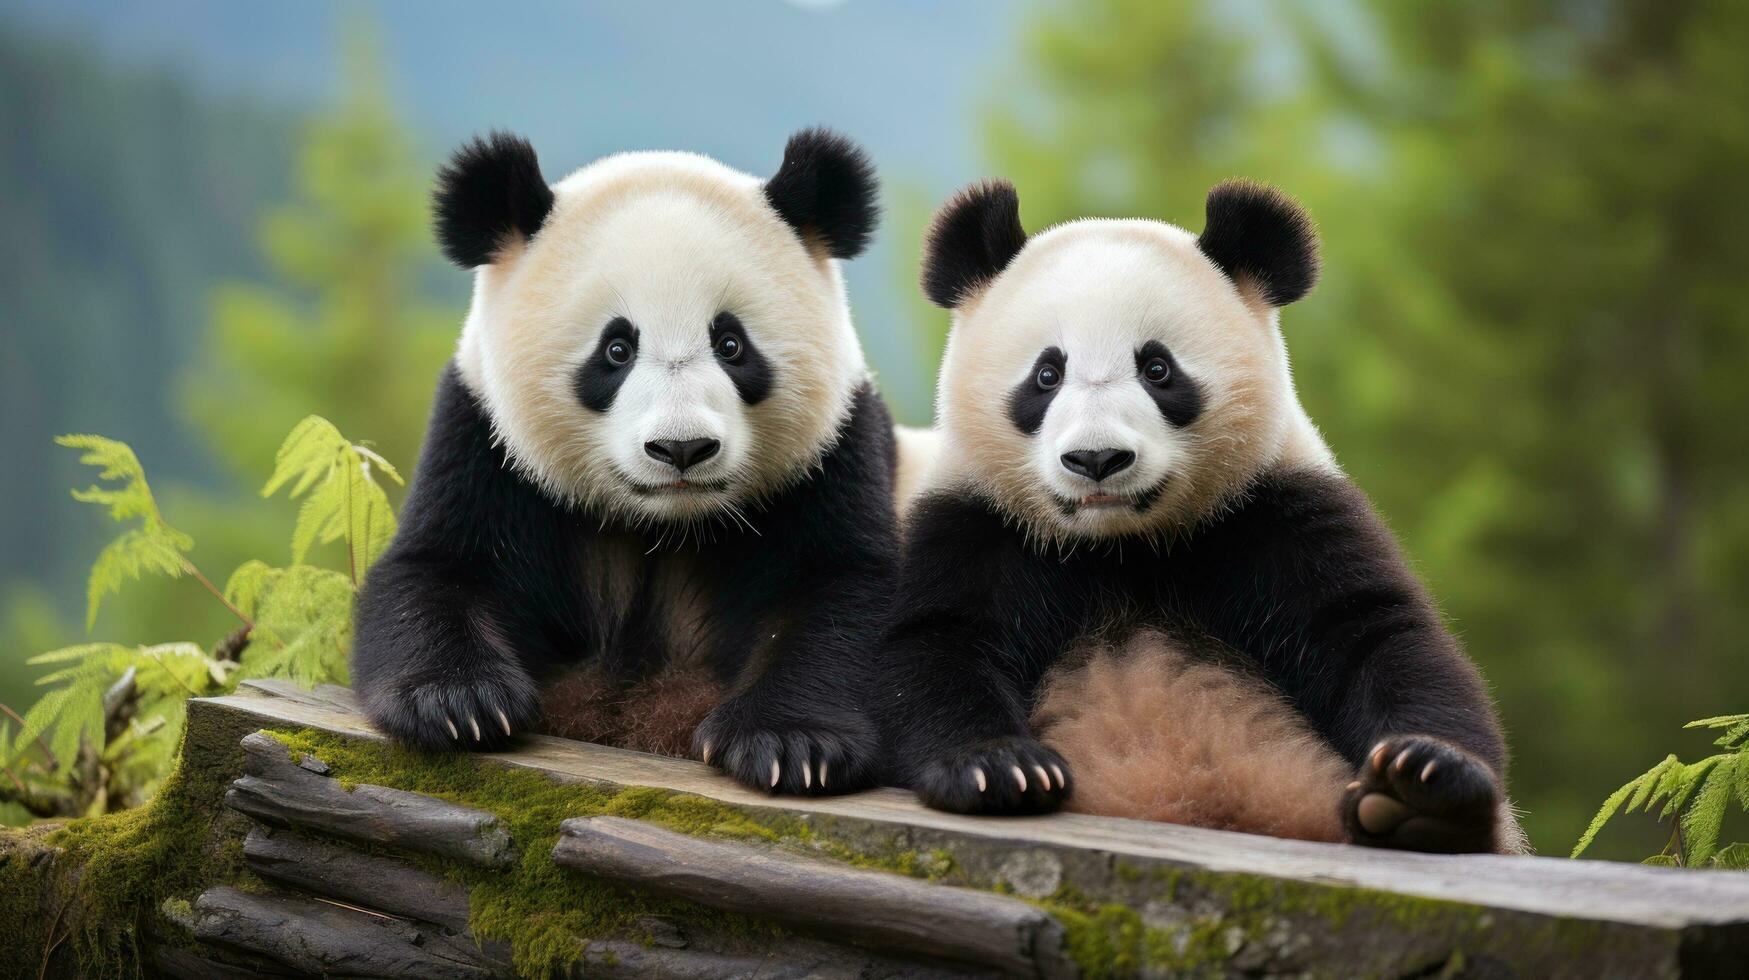 Two pandas sitting together looking content and relaxed photo